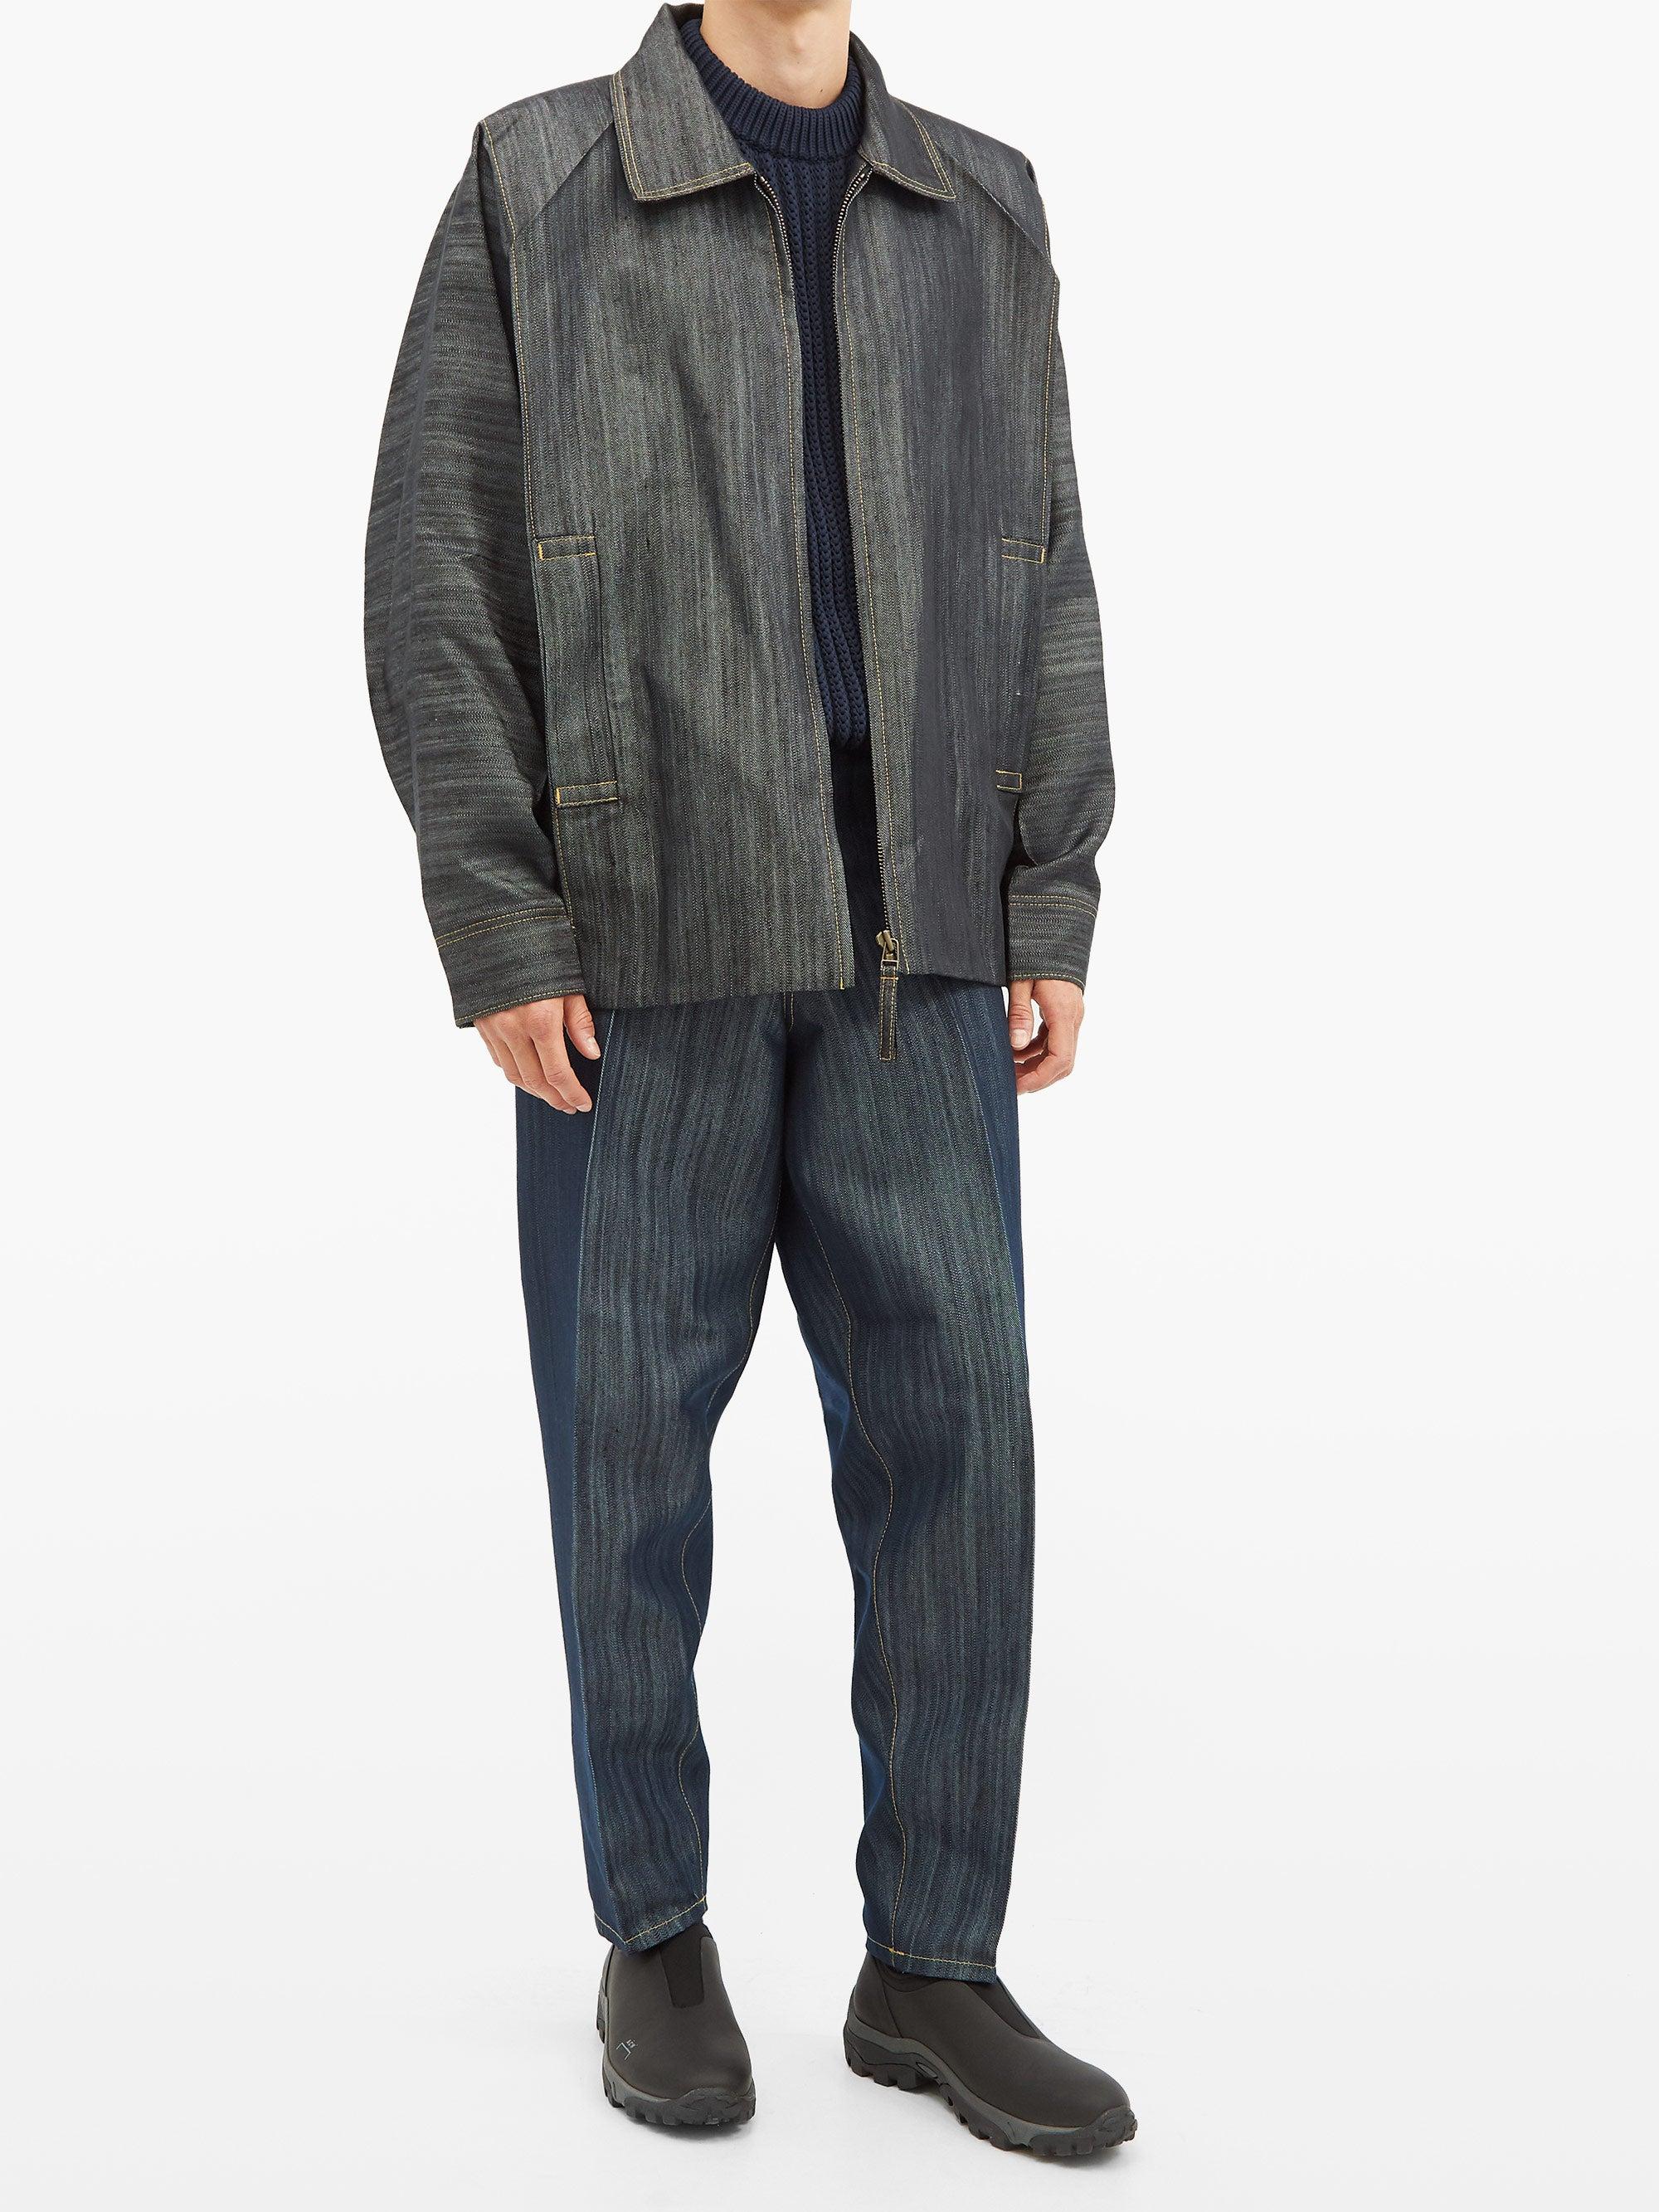 Issey Miyake Denim Plissé Cropped Jeans in Navy (Blue) for Men - Lyst